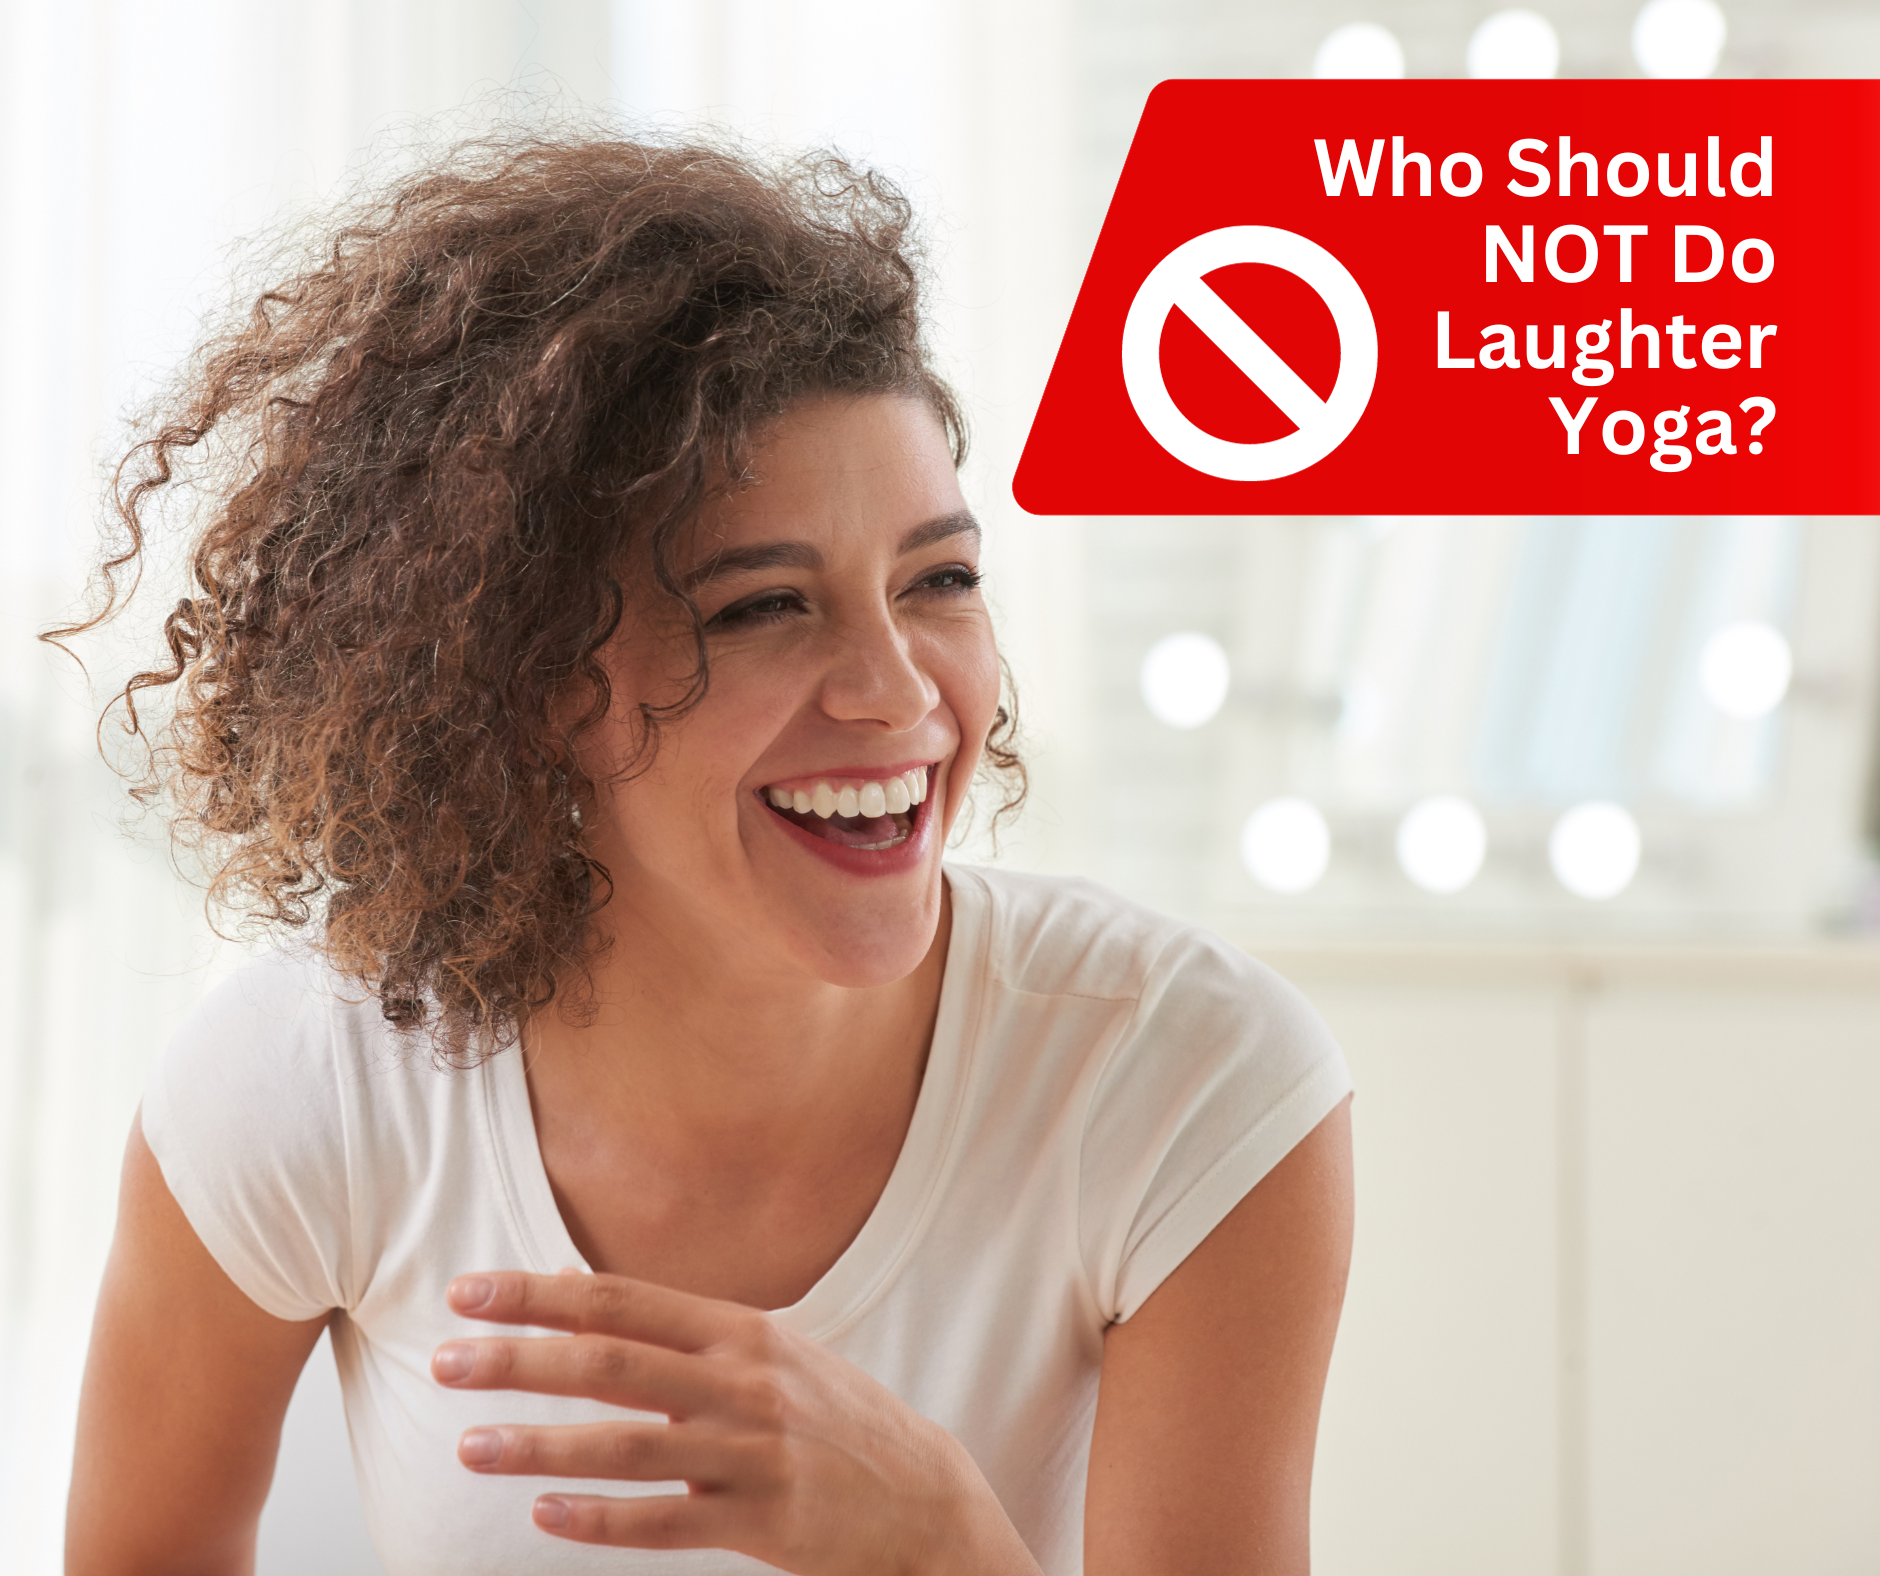 Who should not do Laughter Yoga